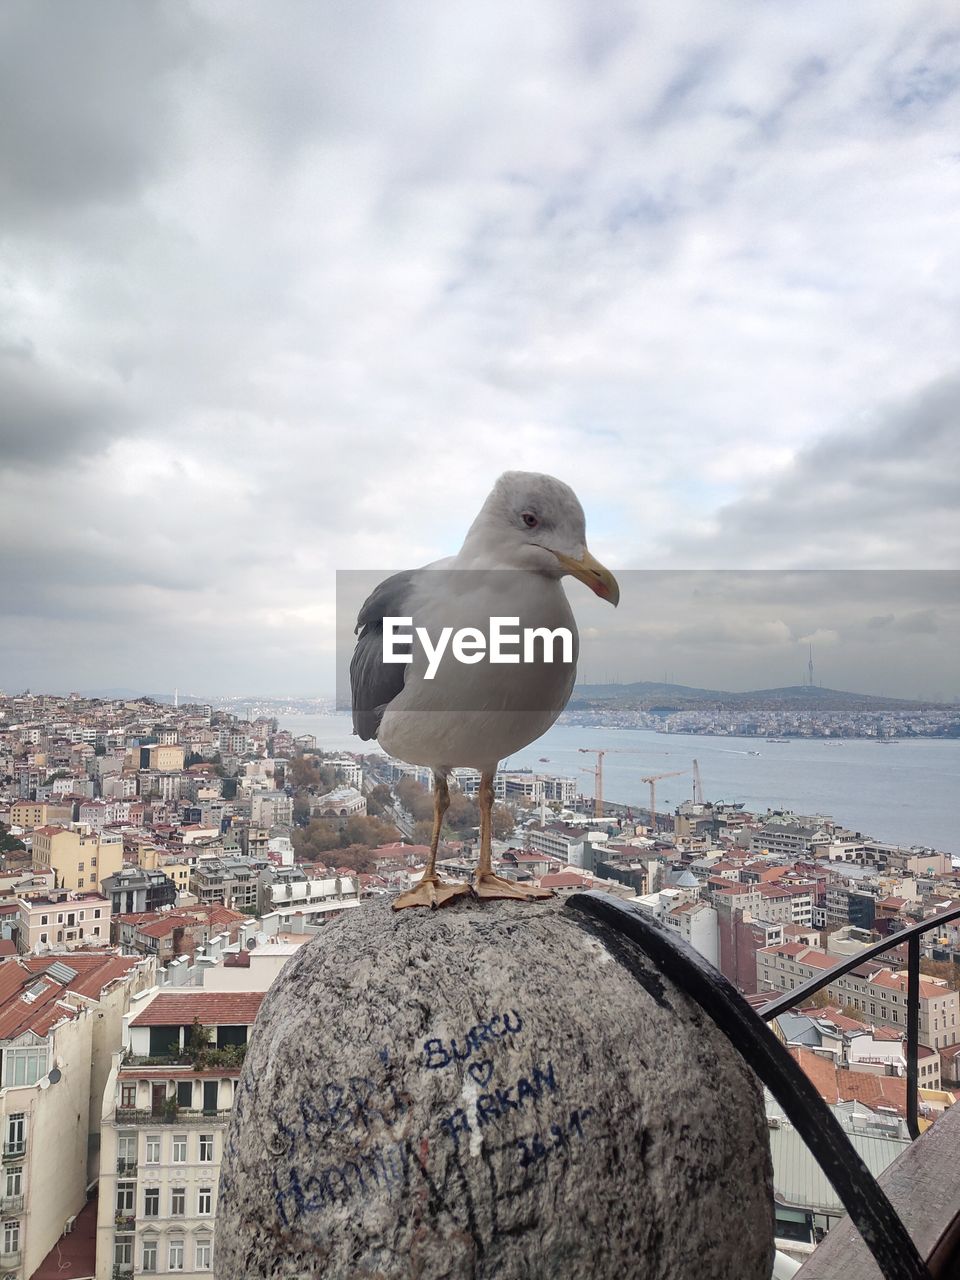 SEAGULL PERCHING ON A CITY AGAINST SKY